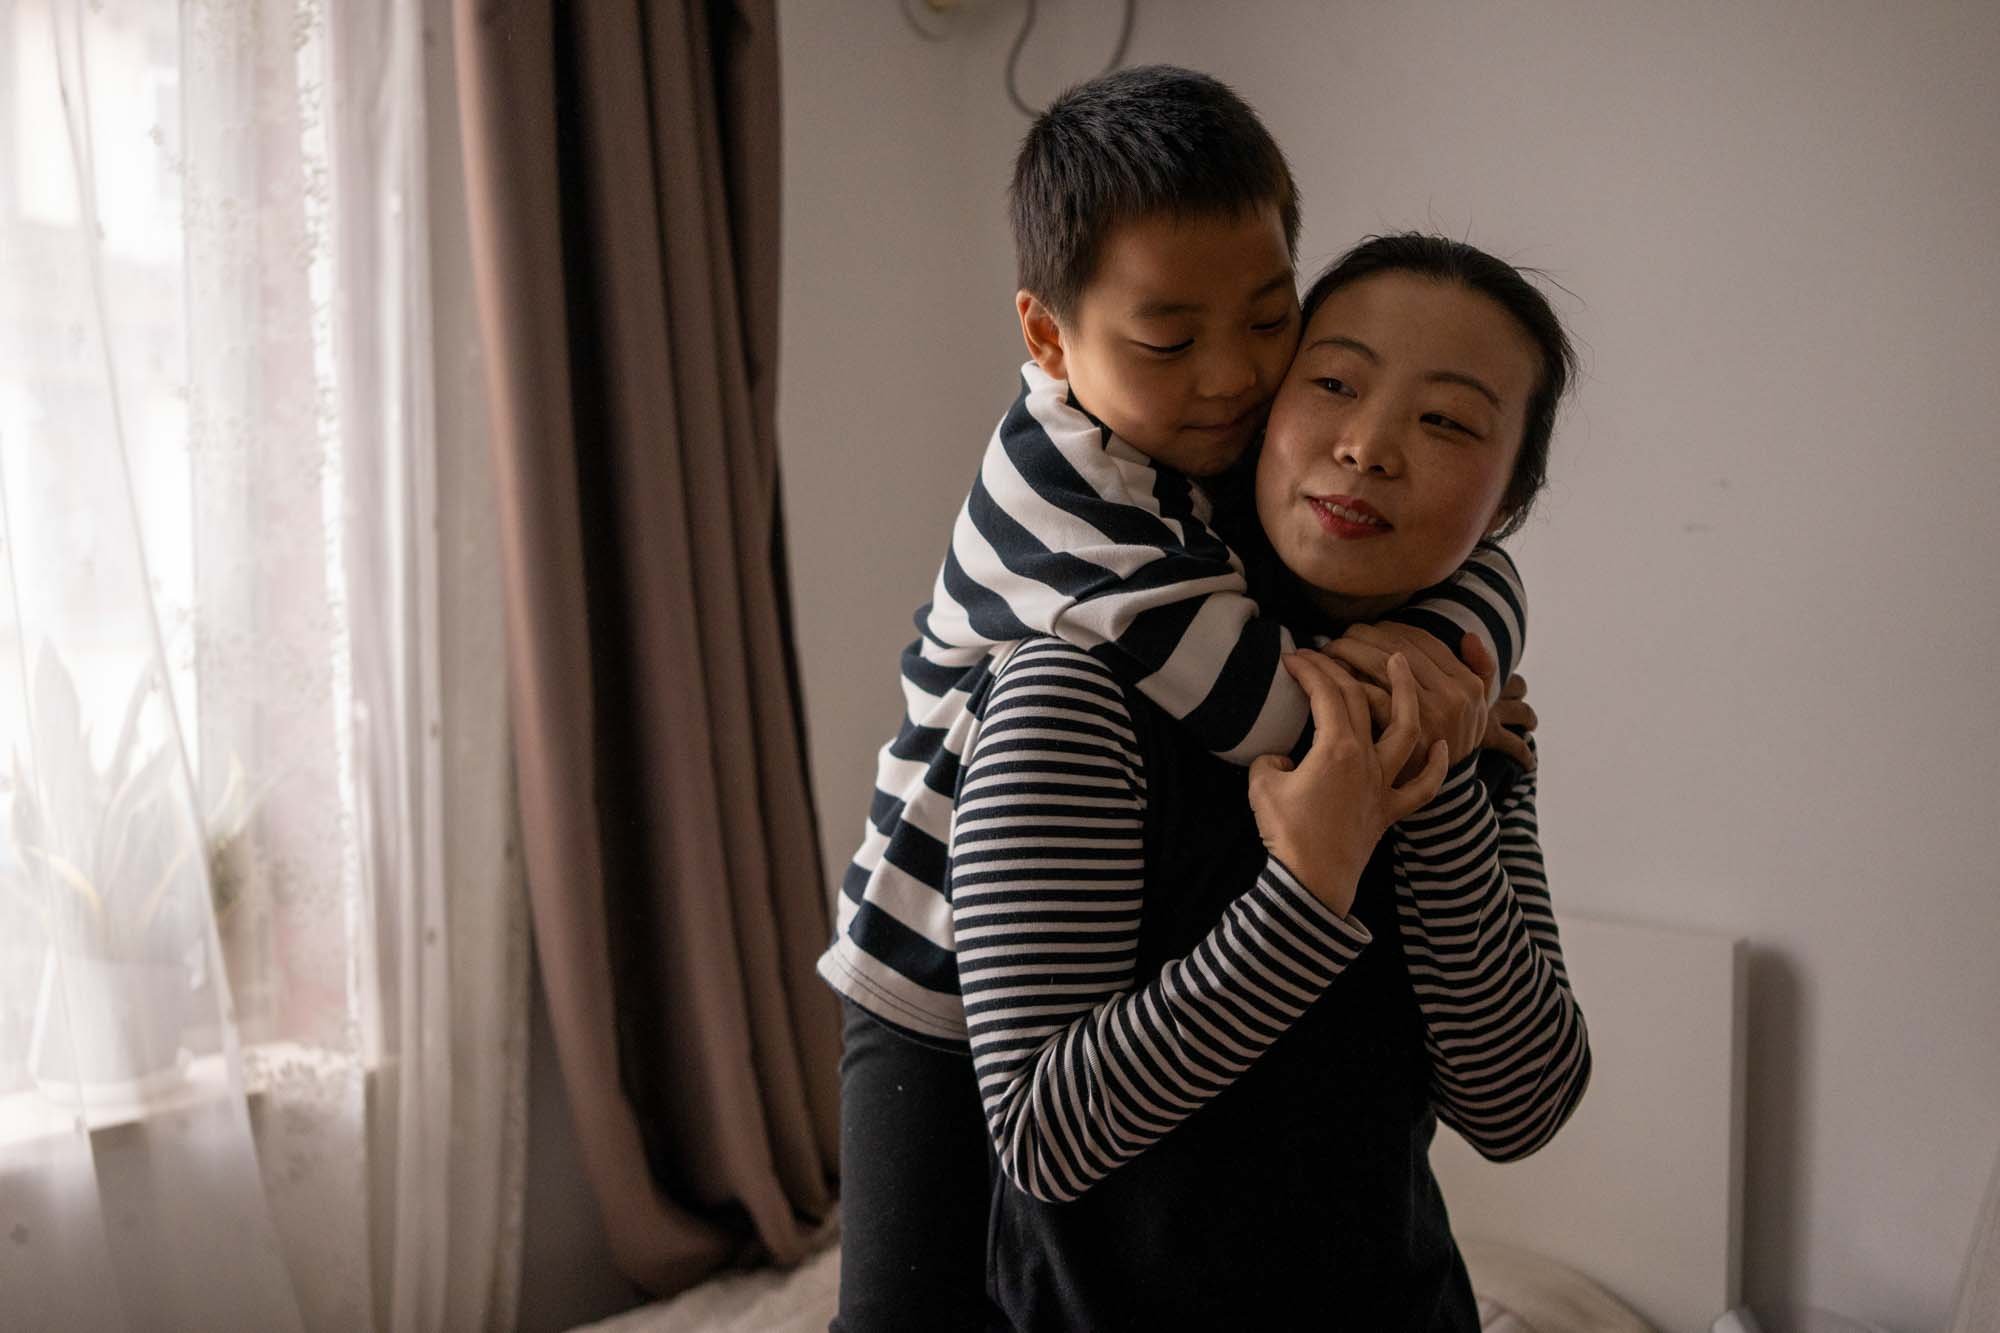  Yue and his son at her home in Shanghai, China 